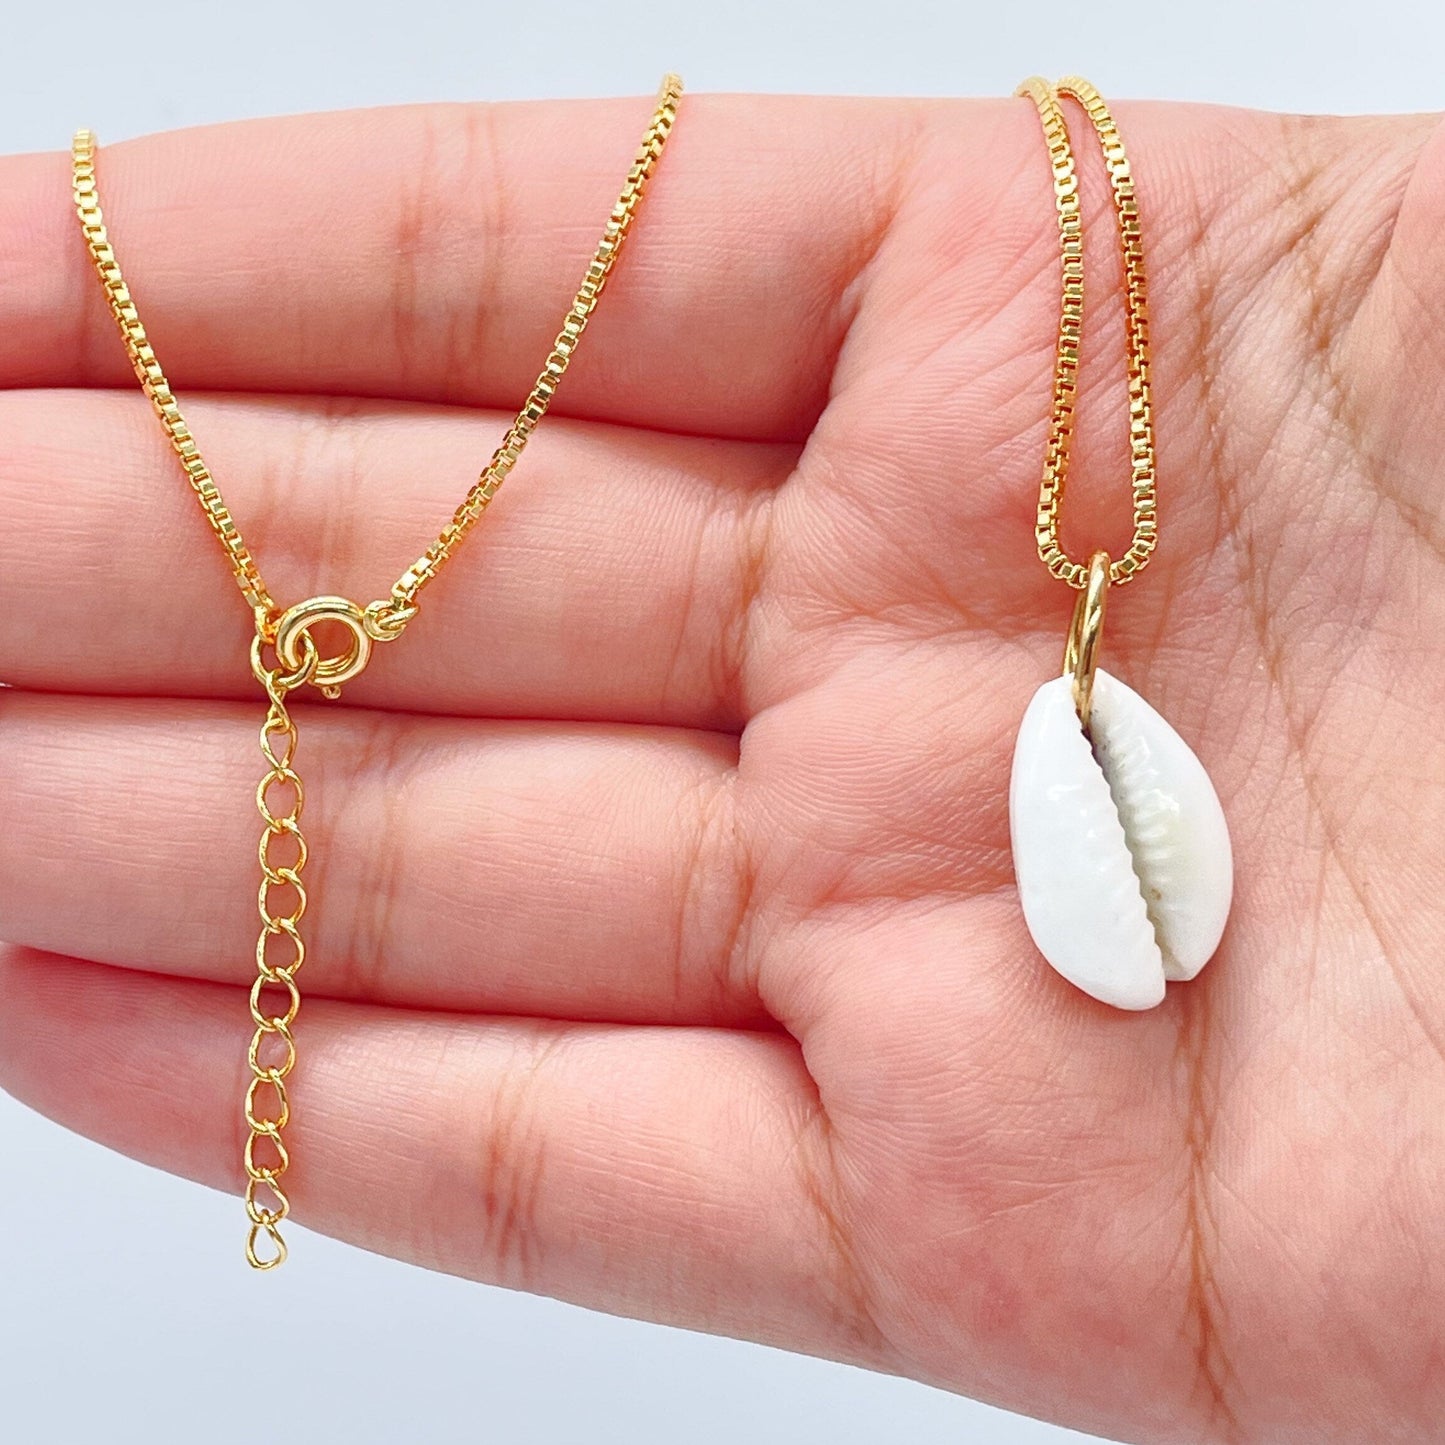 18k Gold Layered Box Chain With White Cowrie Shell Charm Necklace, Protection